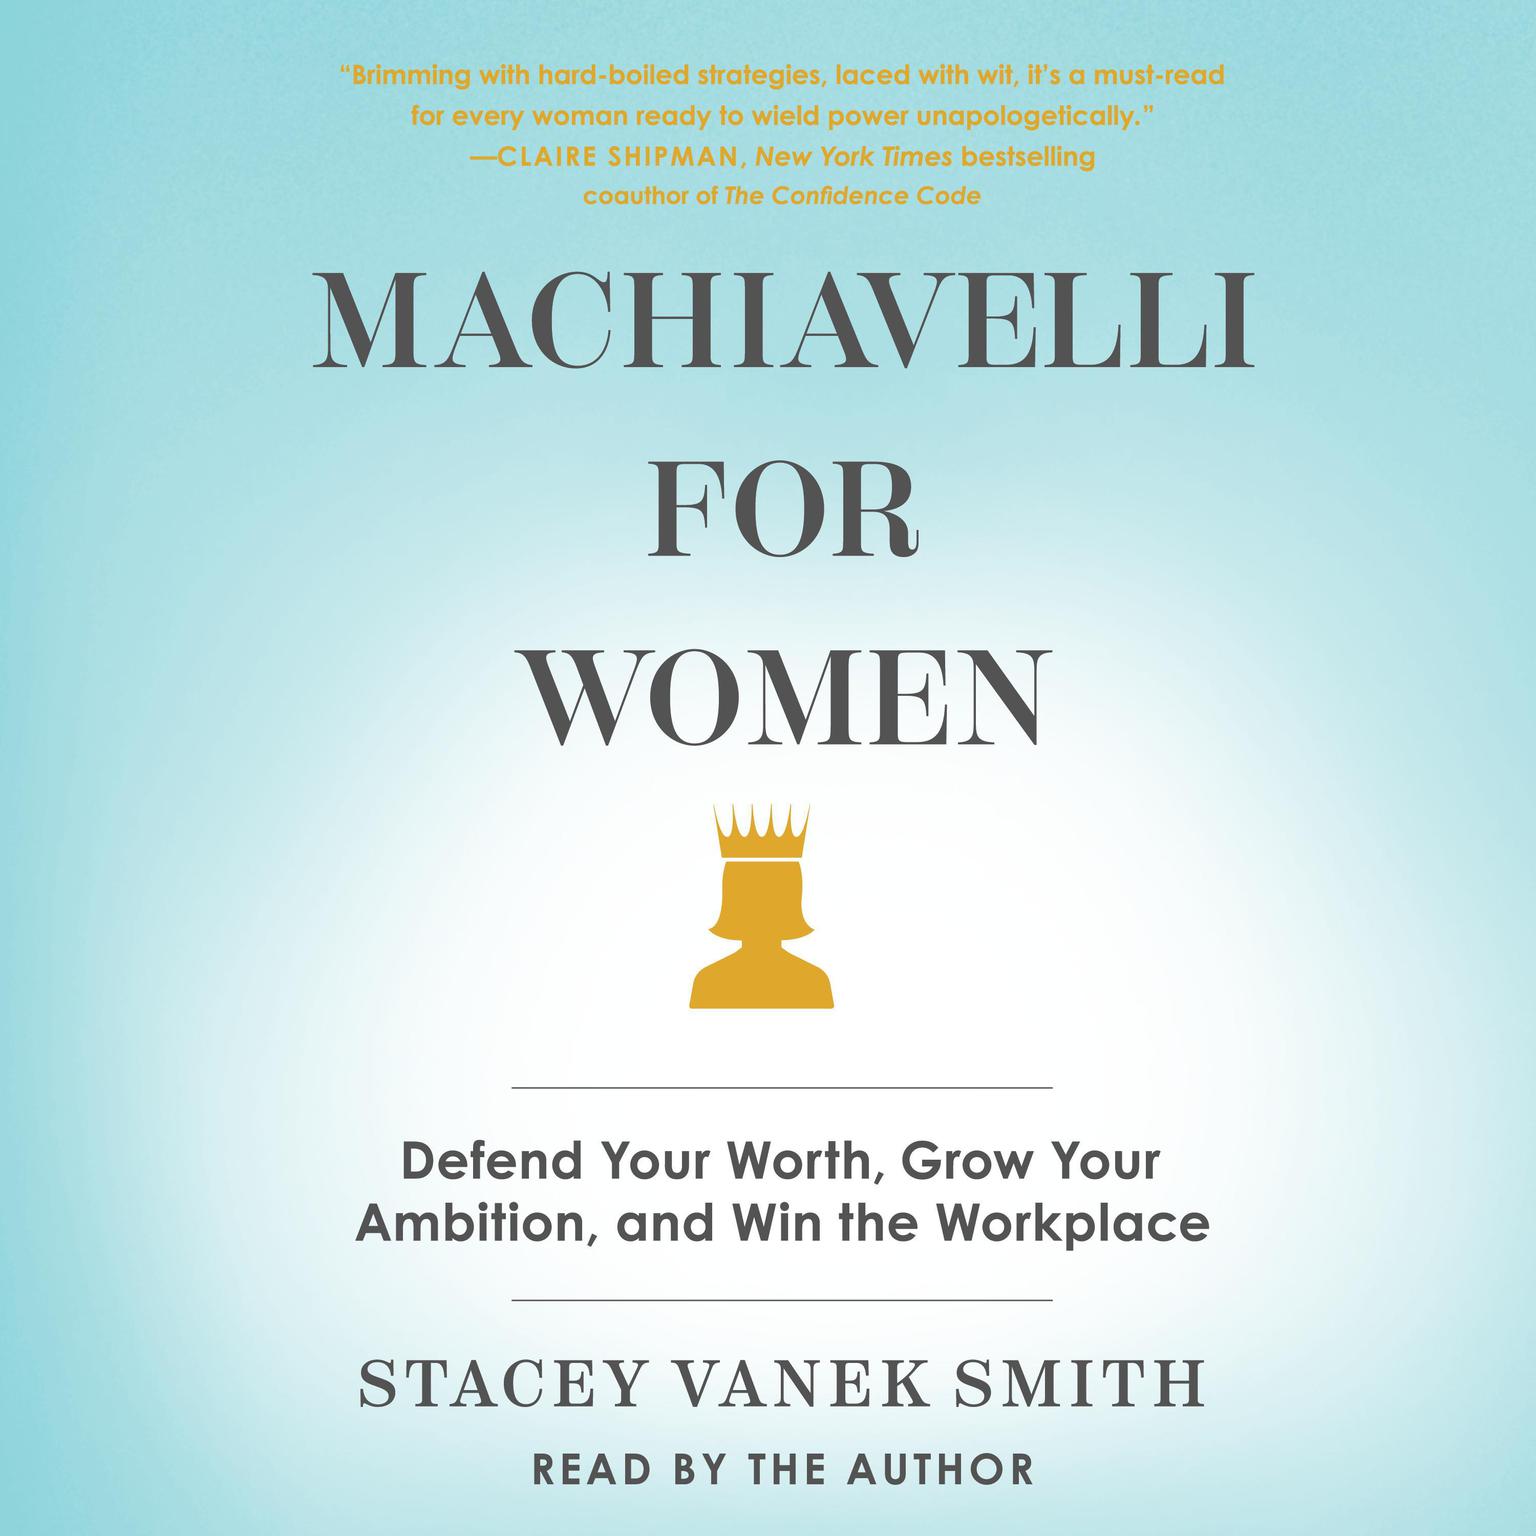 Machiavelli for Women: Defend Your Worth, Grow Your Ambition, and Win the Workplace Audiobook, by Stacey Vanek Smith